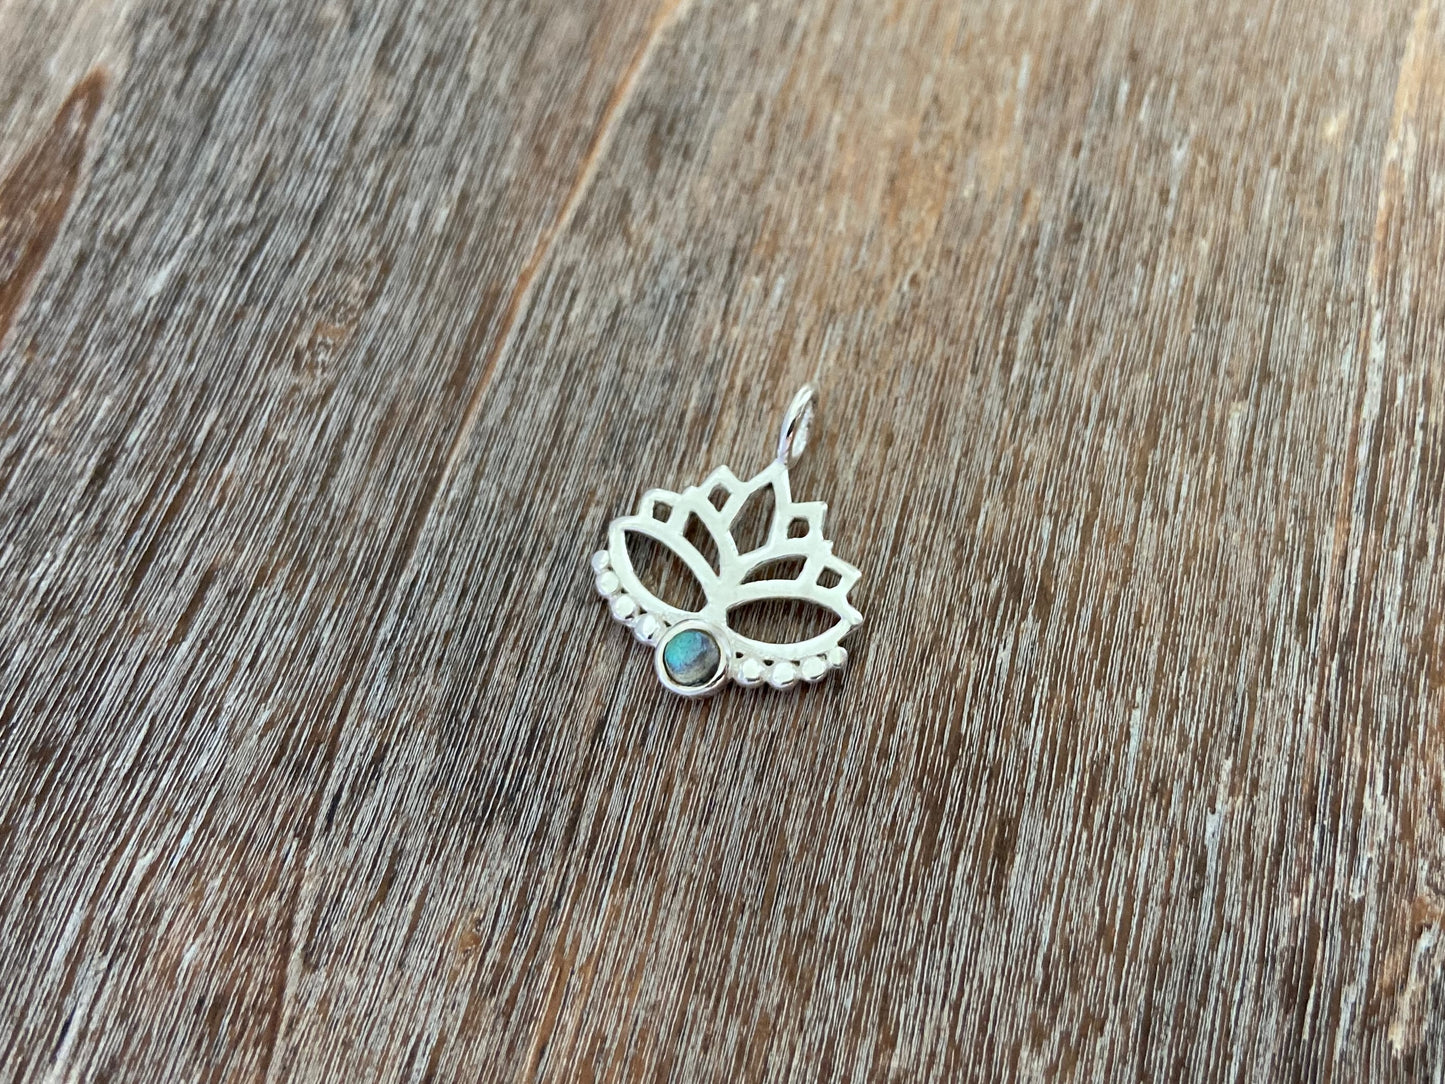 Lotus flower pendant with labradorite stone and silver dots 